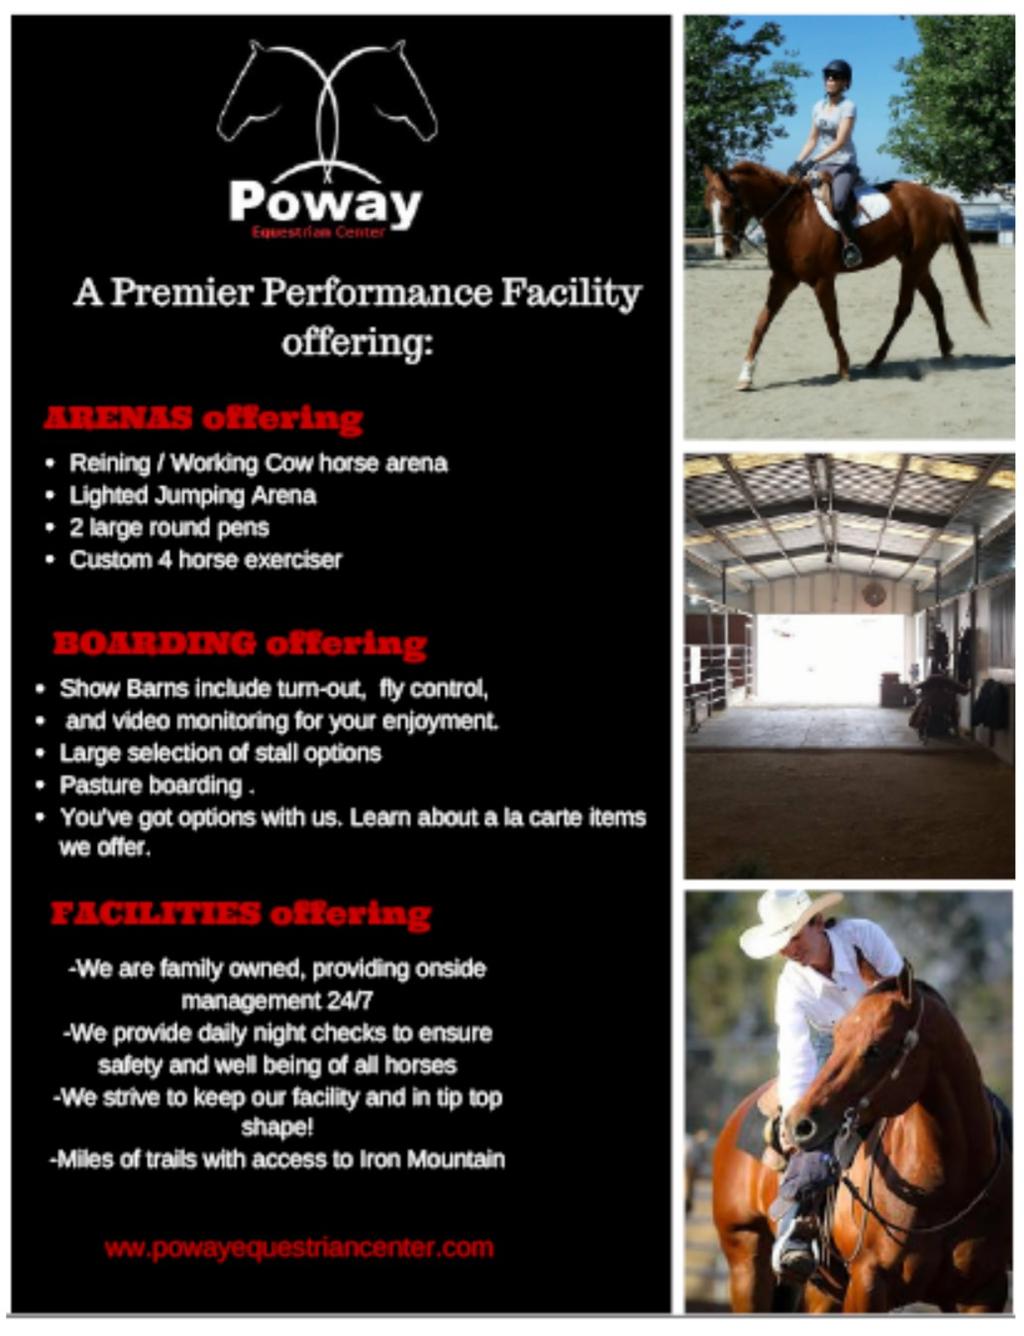 HORSE TALES Published monthly in Poway, California by the Poway Valley Riders Association.